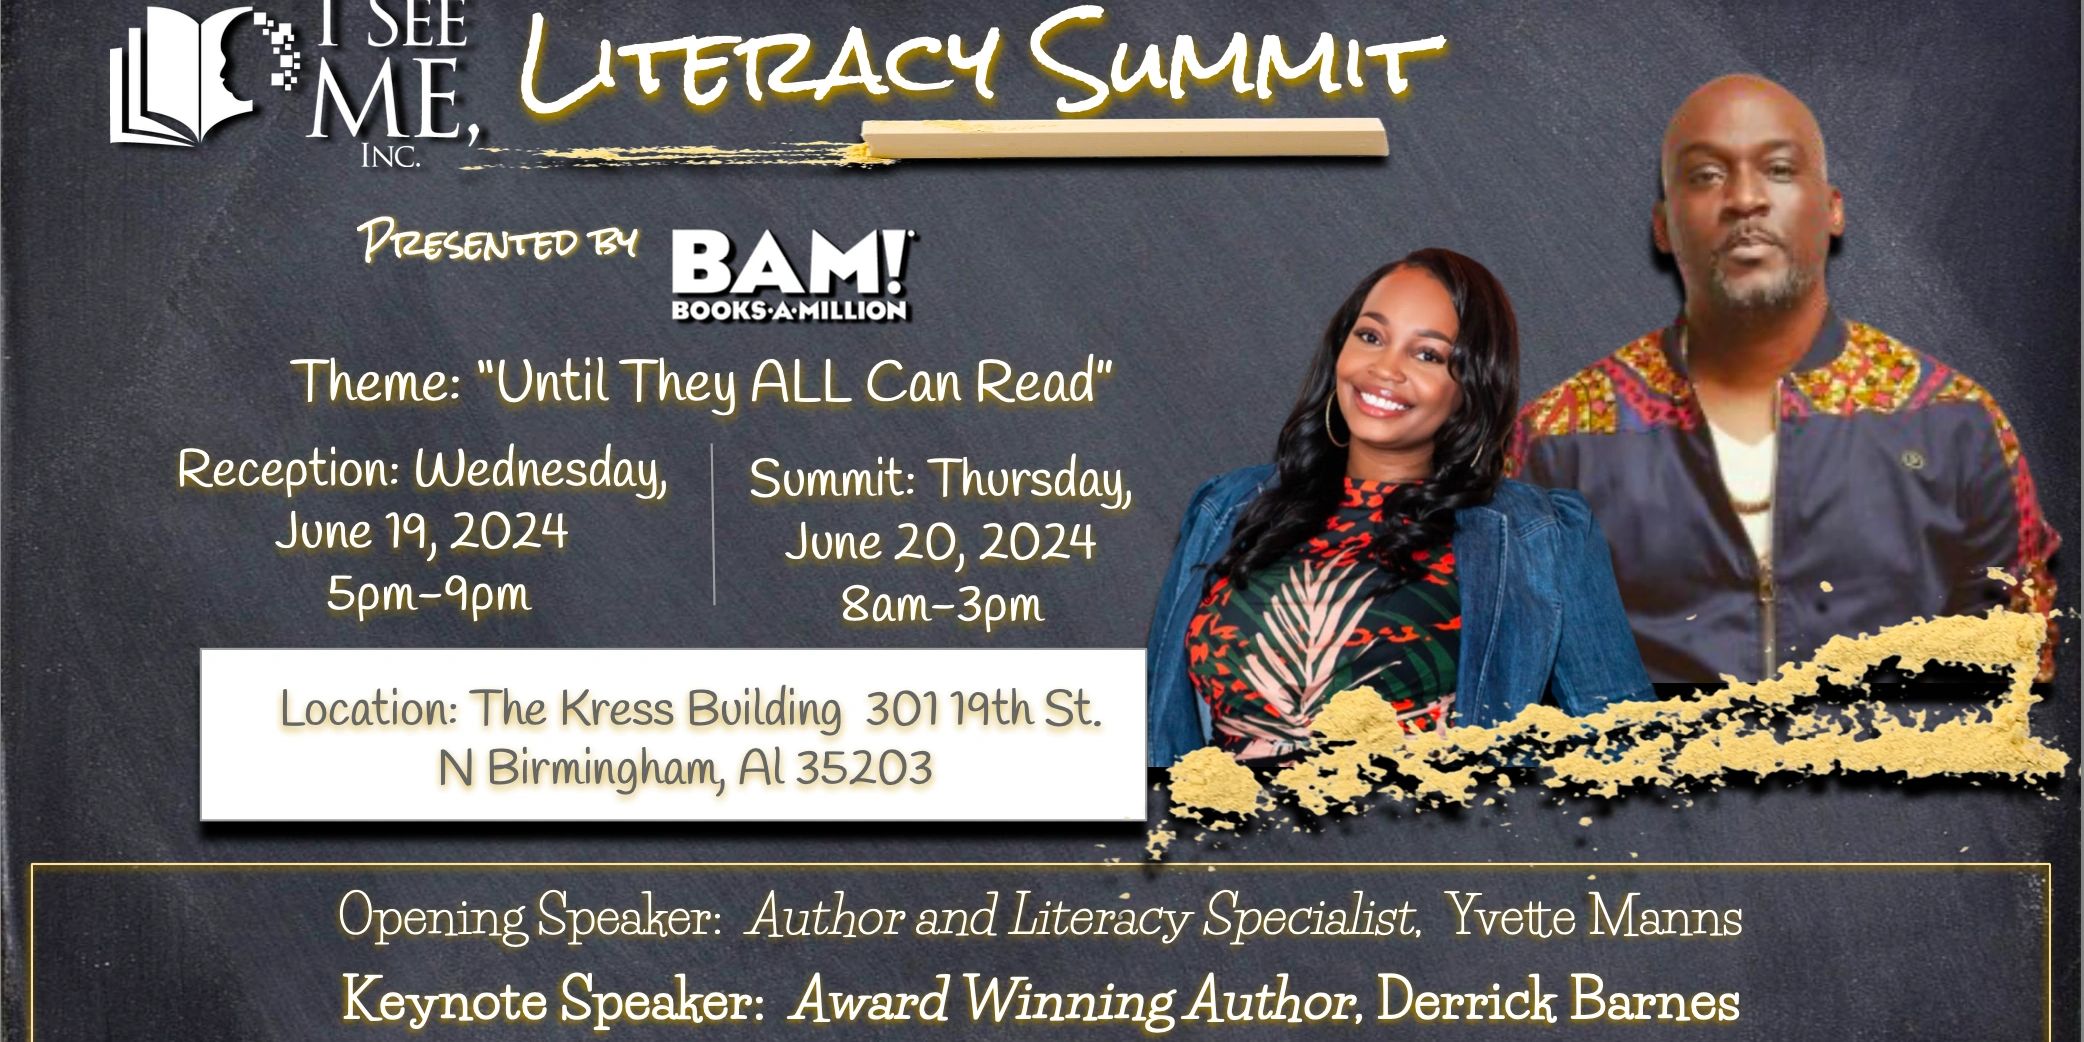 Join us at the "I See Me, Inc. Literacy Summit" to celebrate the power of reading and learning toget